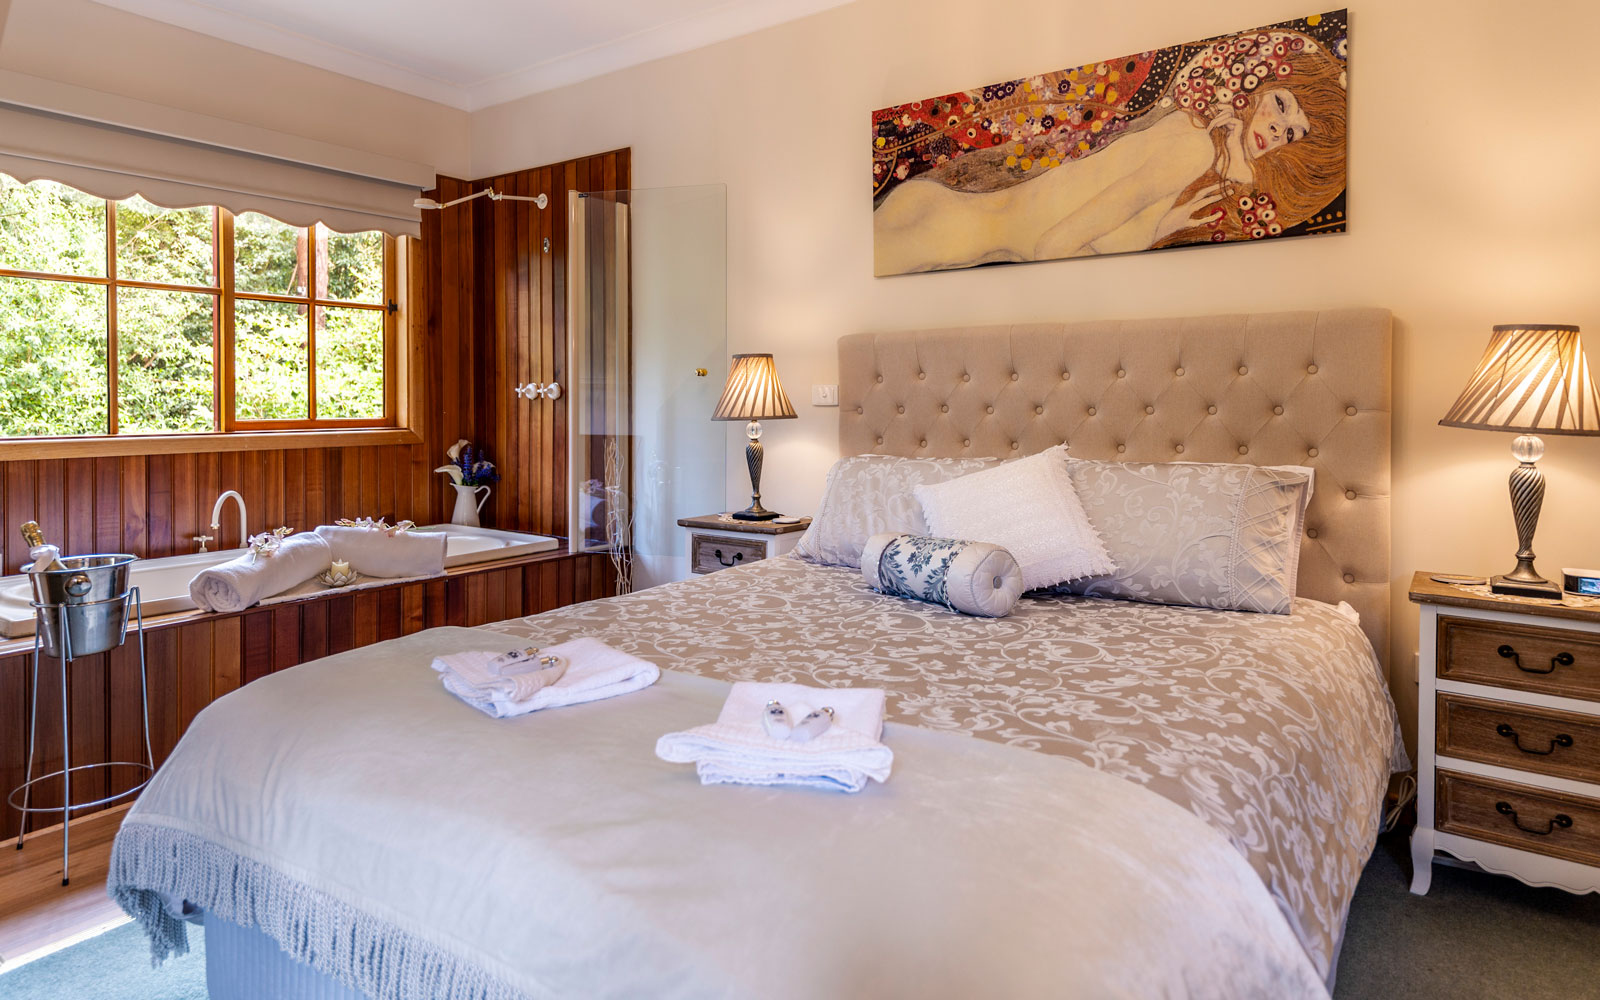 Salvatore Suite at Mountain Lodge in the Dandenong Ranges